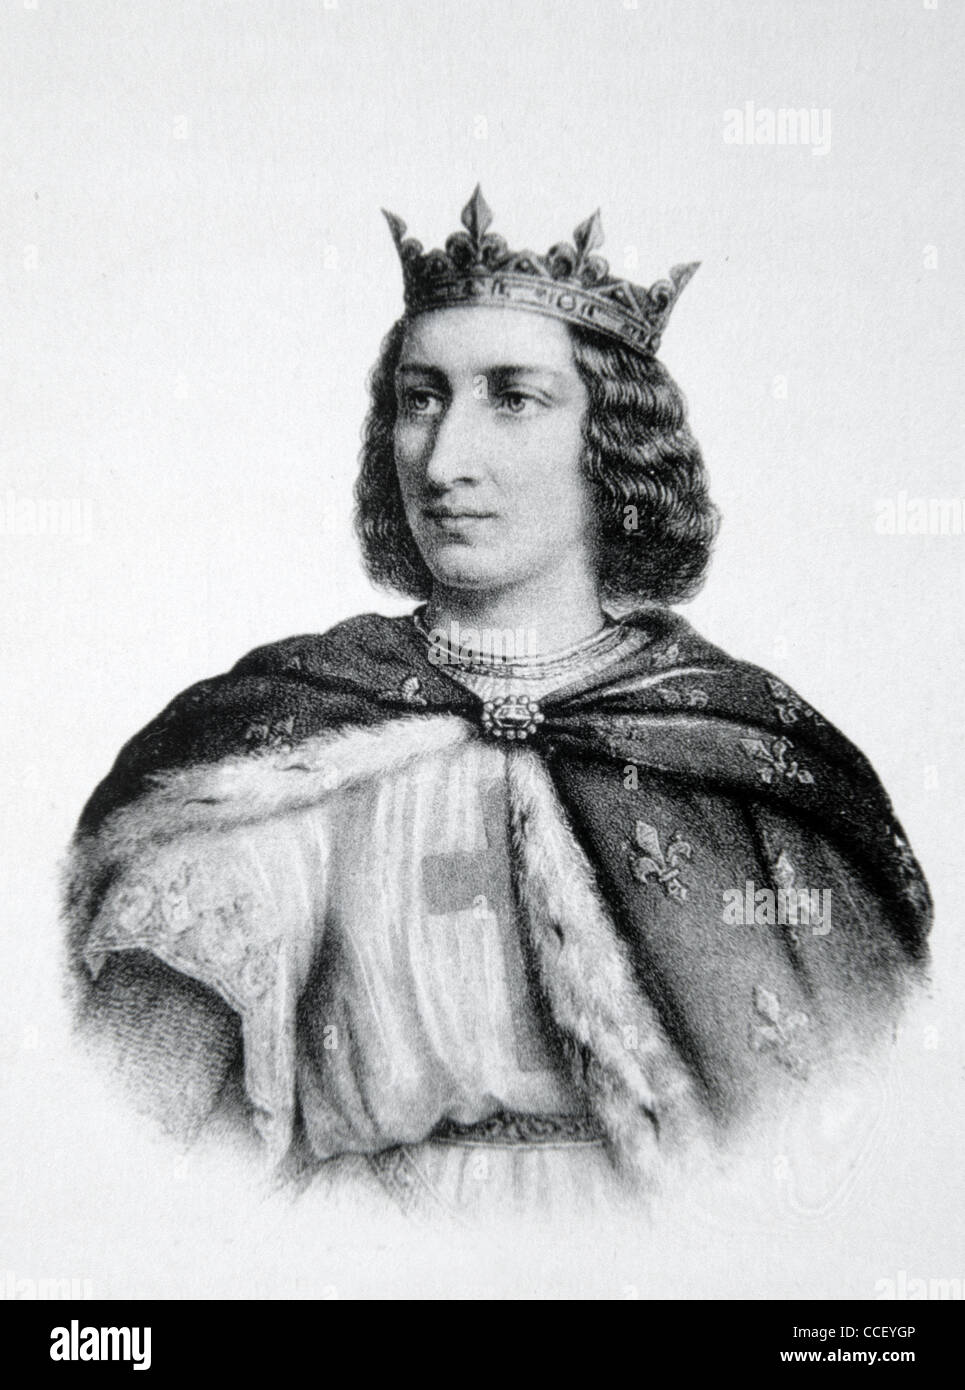 Portrait of French King Louis IX, called Saint Louis (1214-70), King of France (1226-70) Vintage Illustration or Engraving Stock Photo